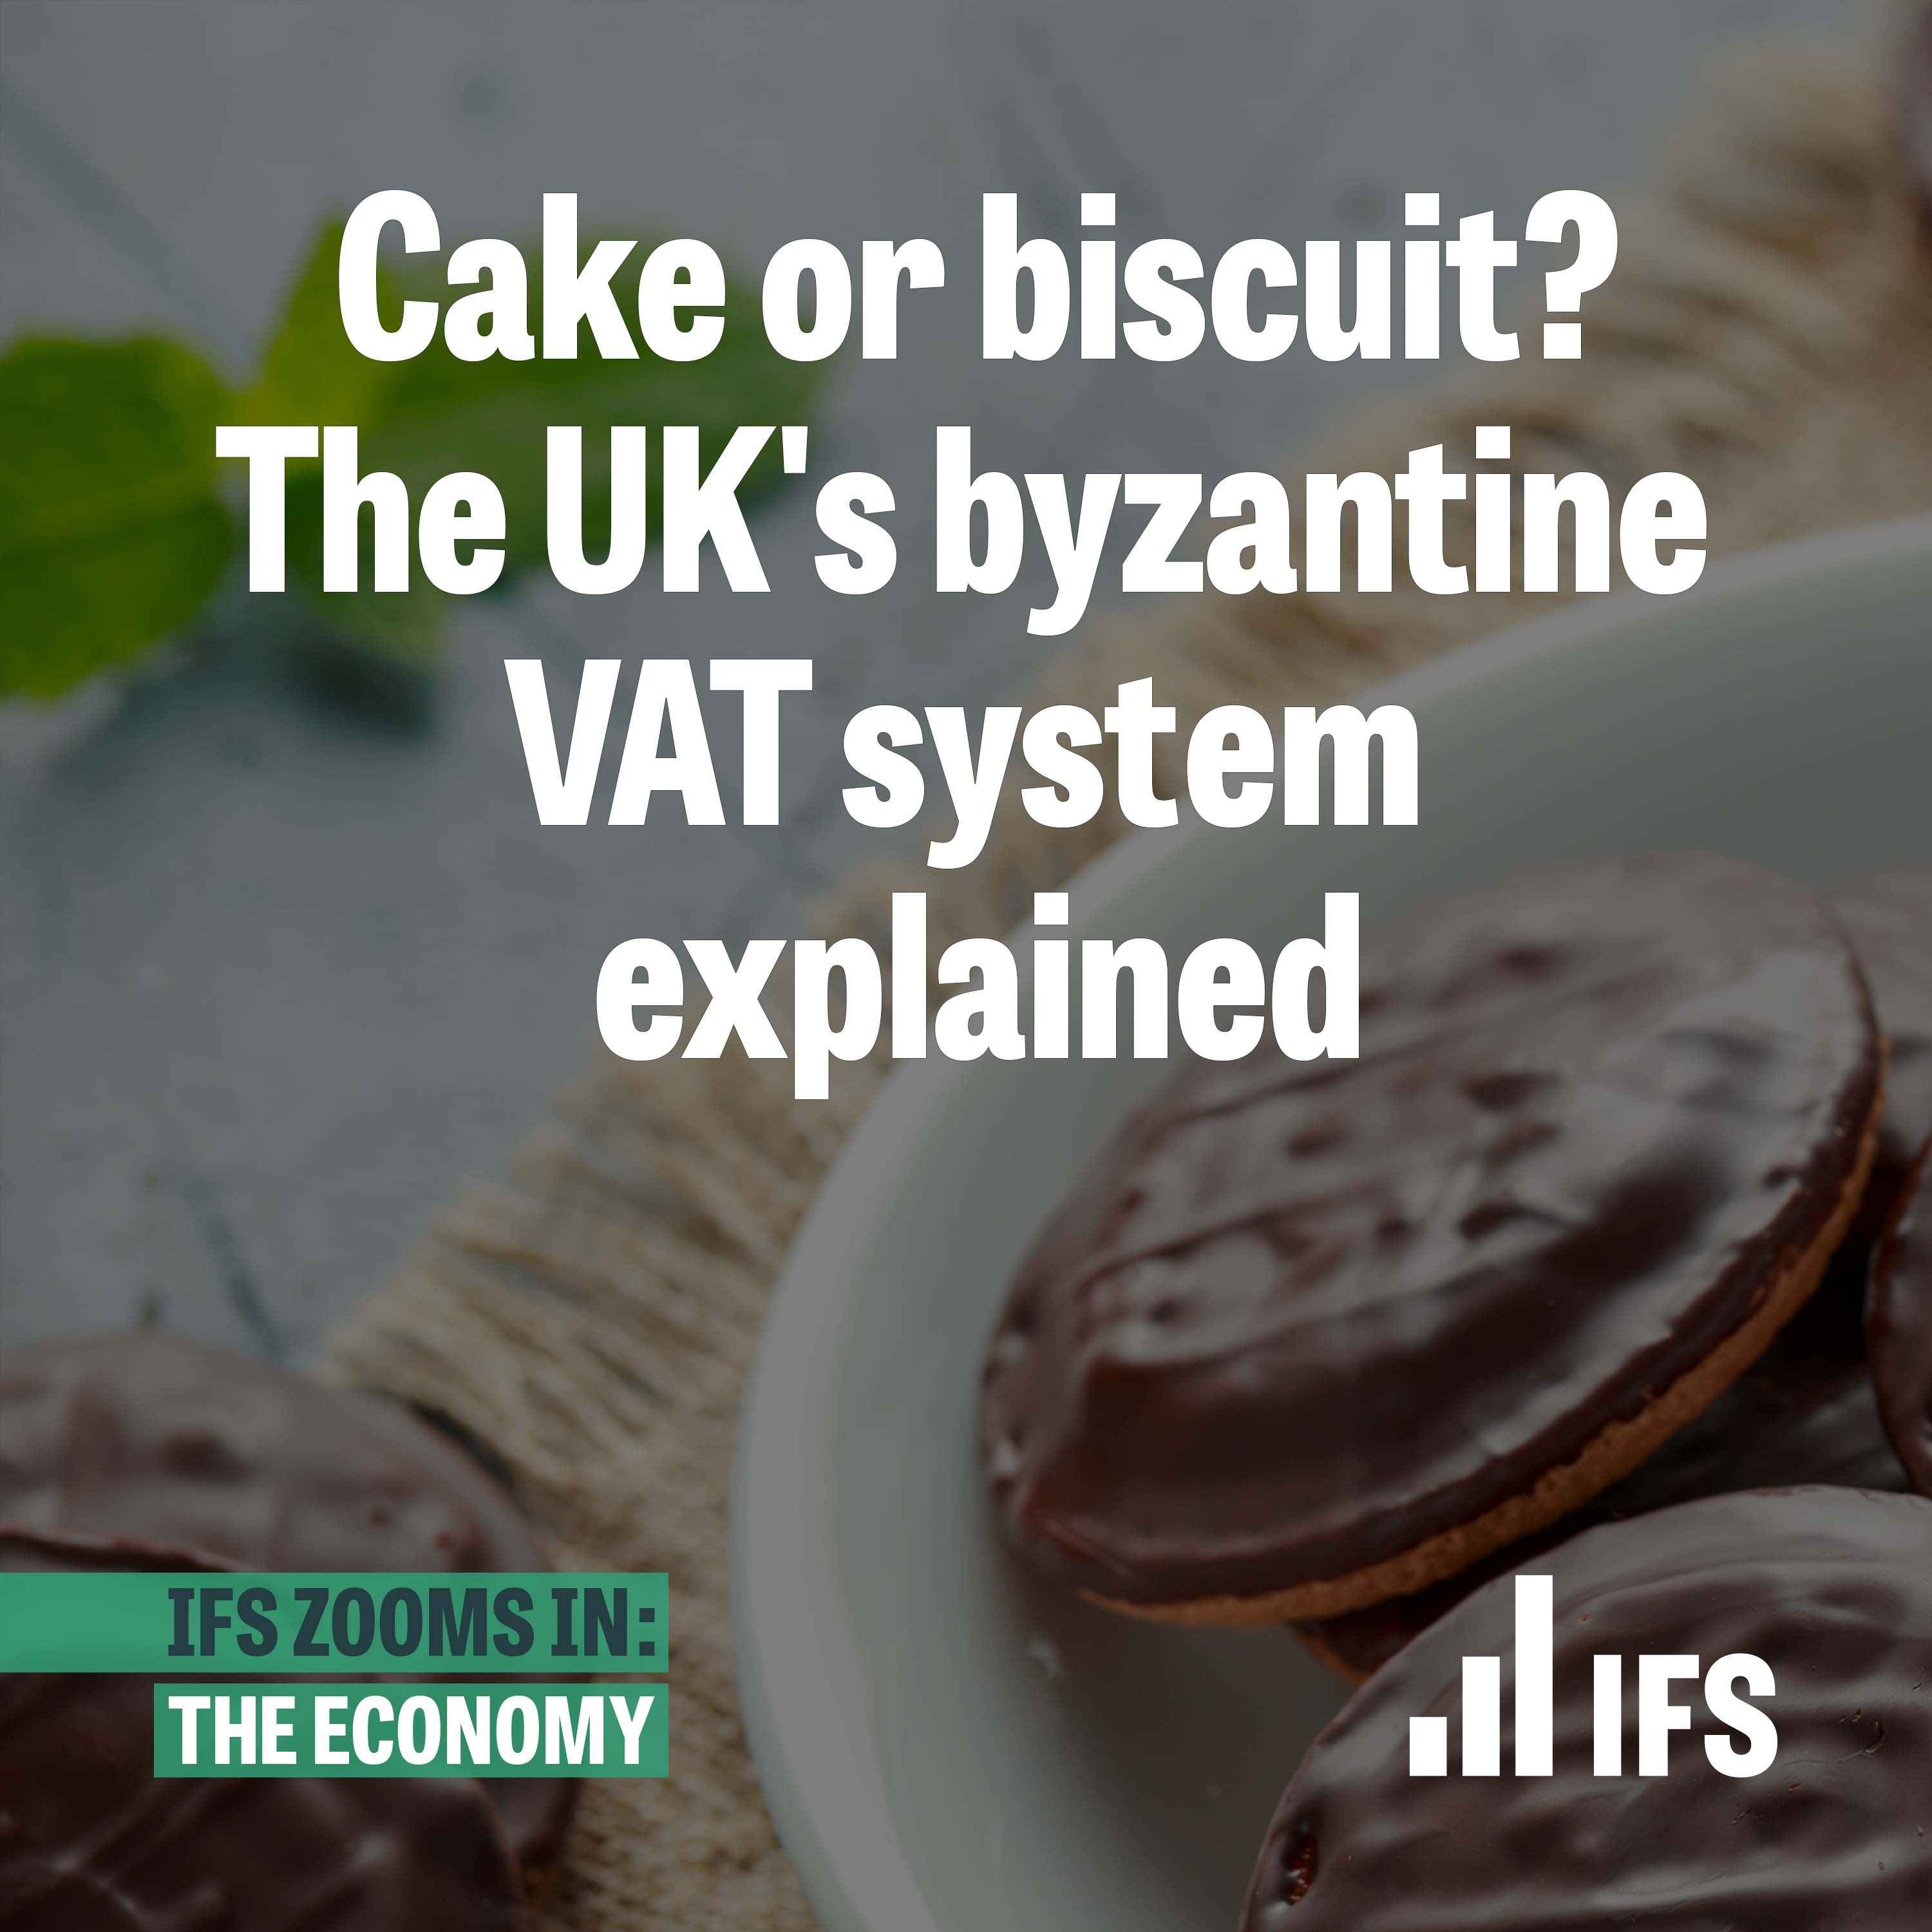 Cake or biscuit? The UK's byzantine VAT system explained